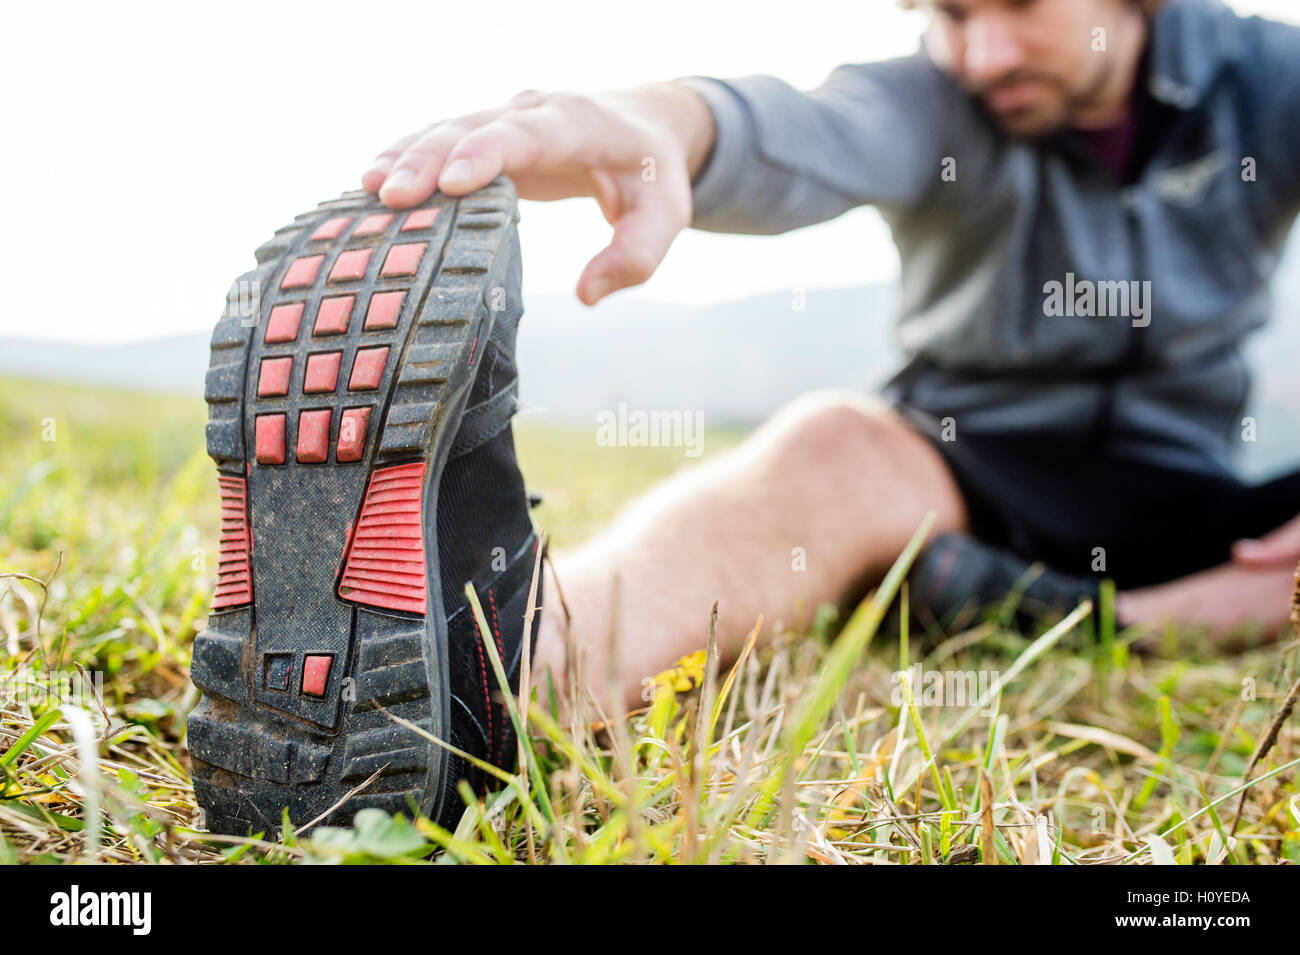 Méconnaissable young runner sitting on grass, stretching leg Banque D'Images